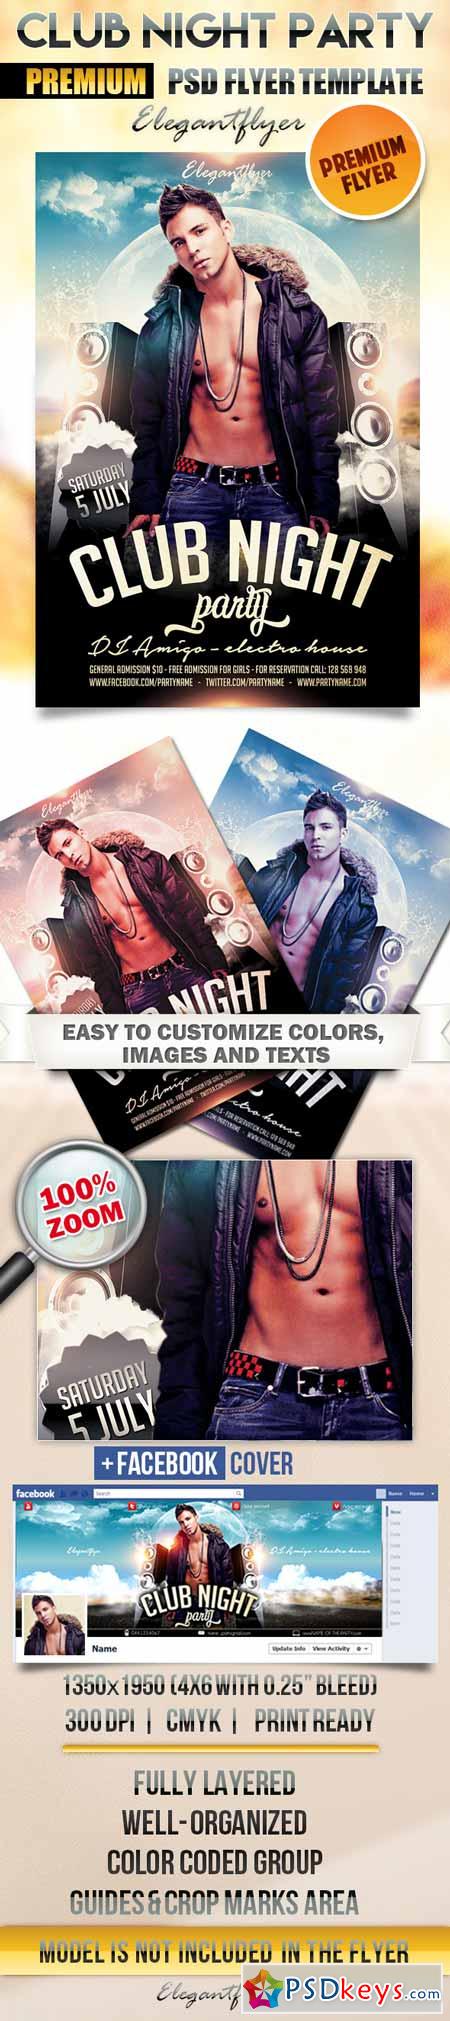 Club night party  Flyer PSD Template + Facebook Cover